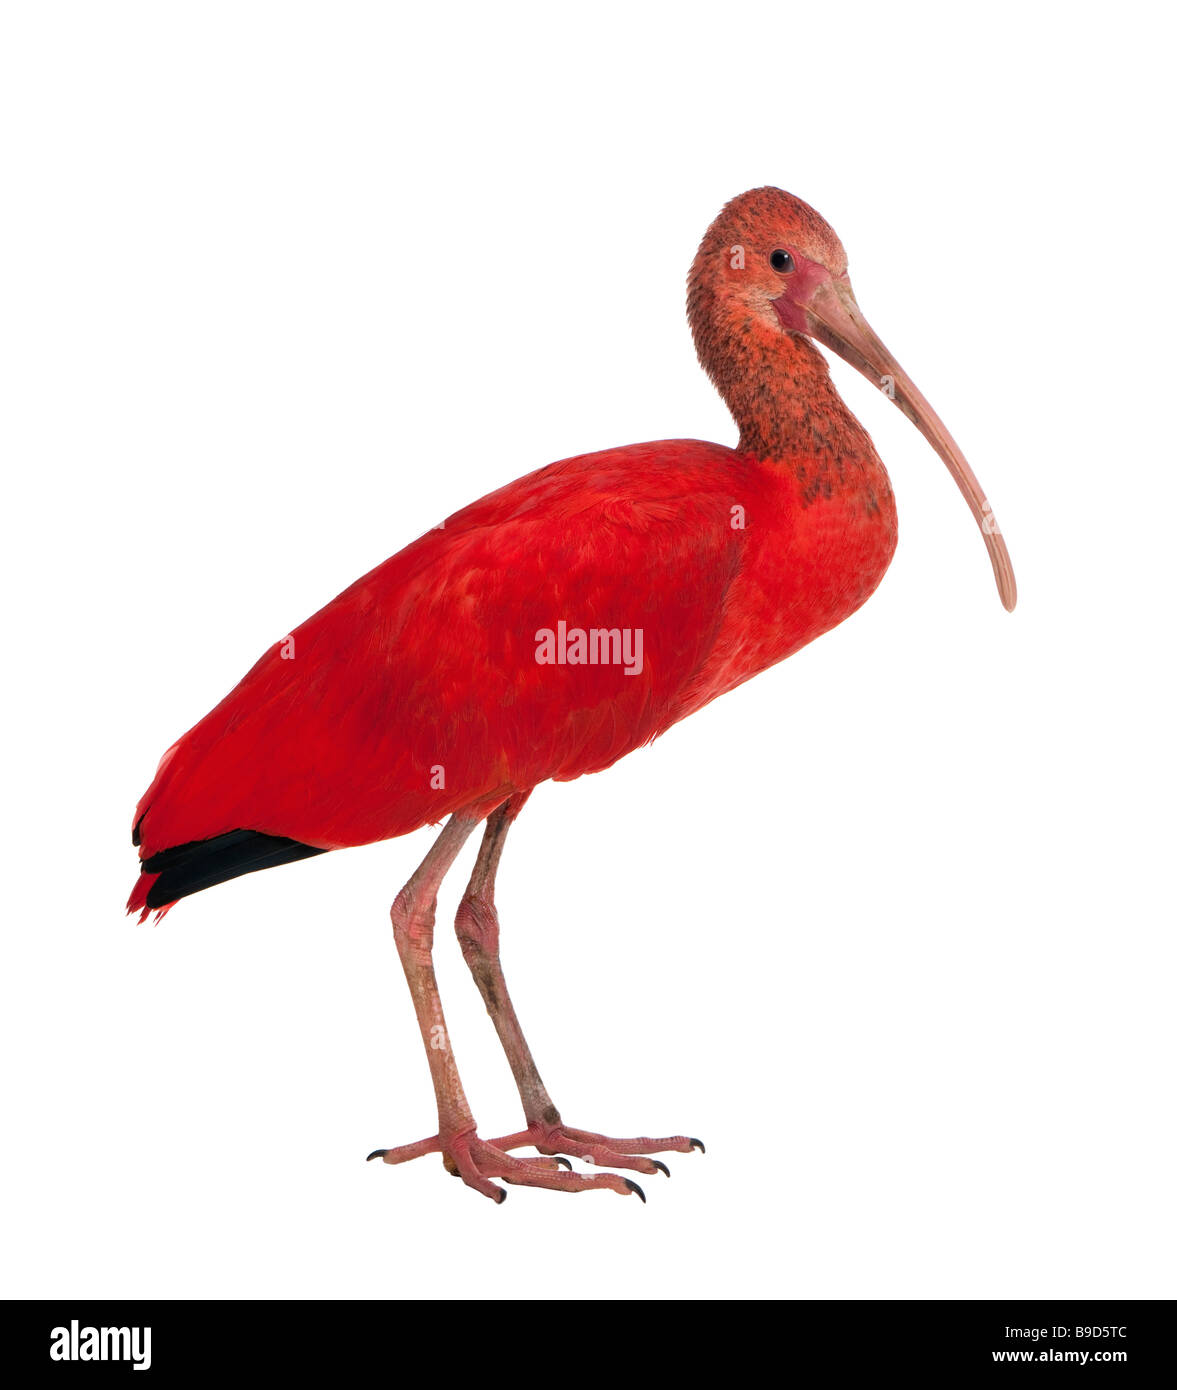 Scarlet Ibis Eudocimus ruber in front of a white background Stock Photo